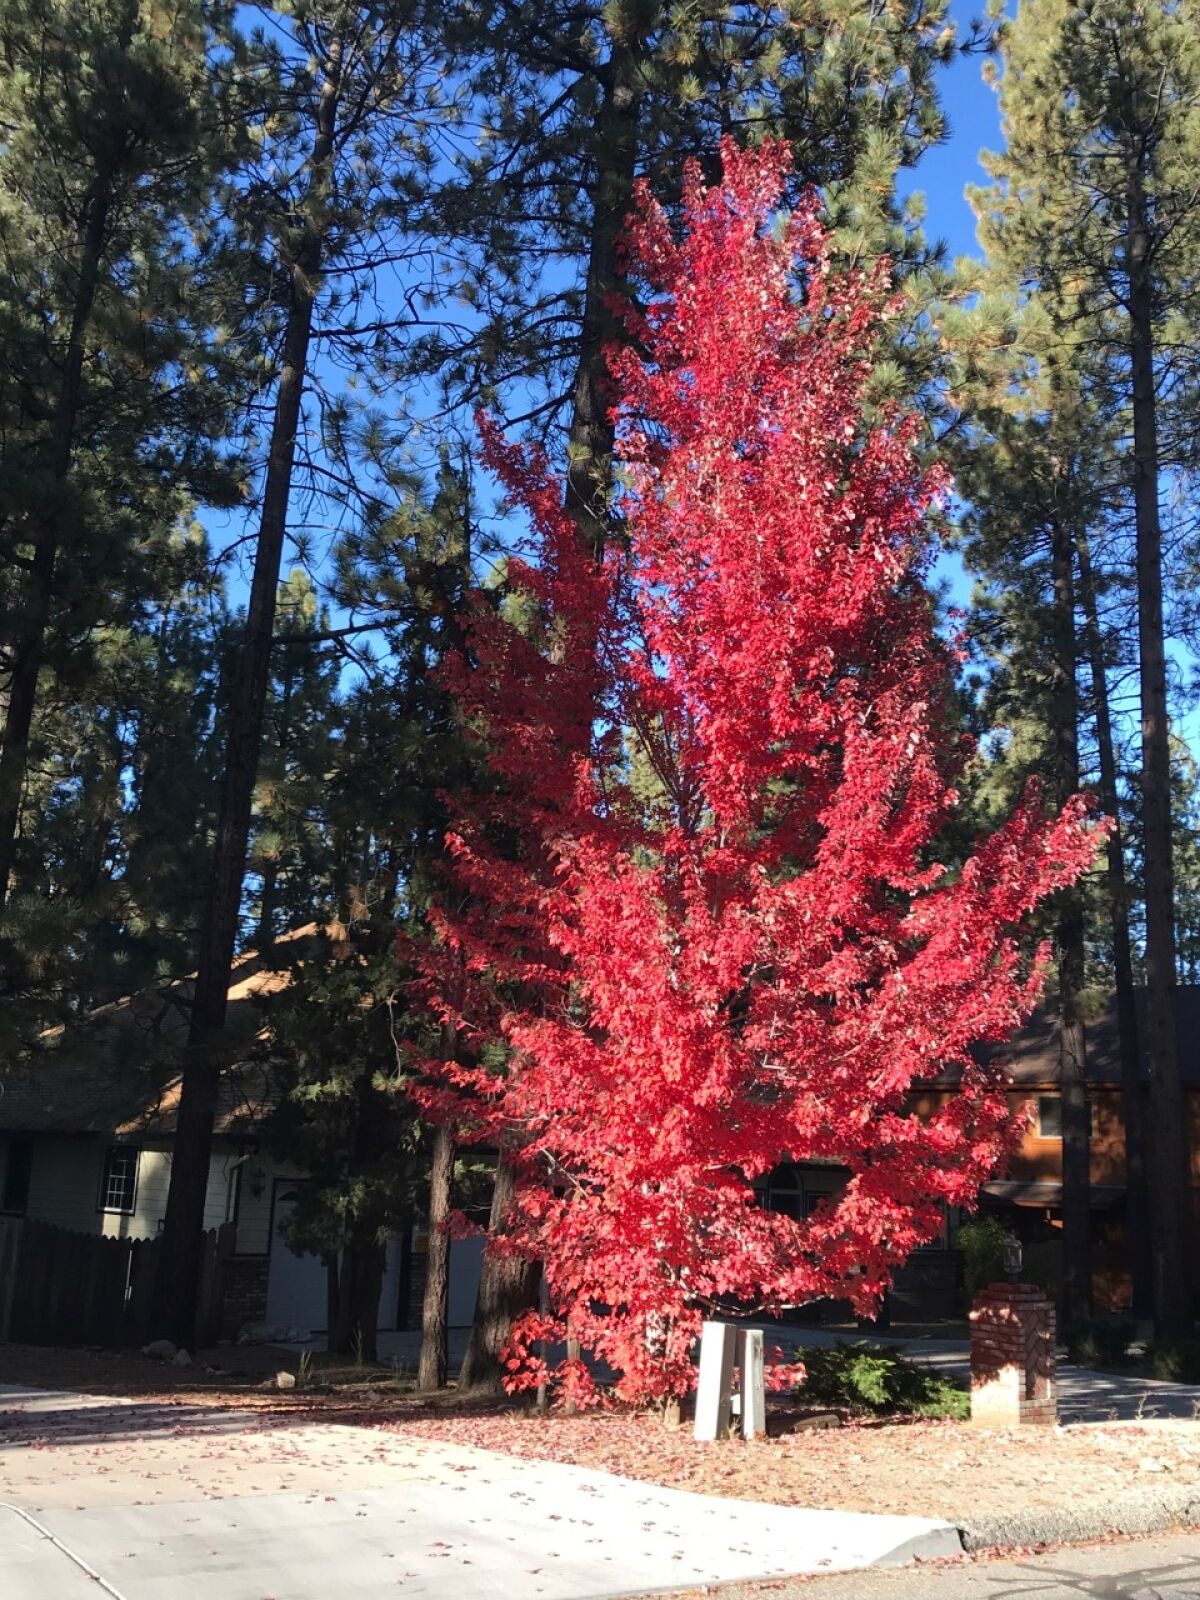 Maples, which are not native to the area, turn flaming red.